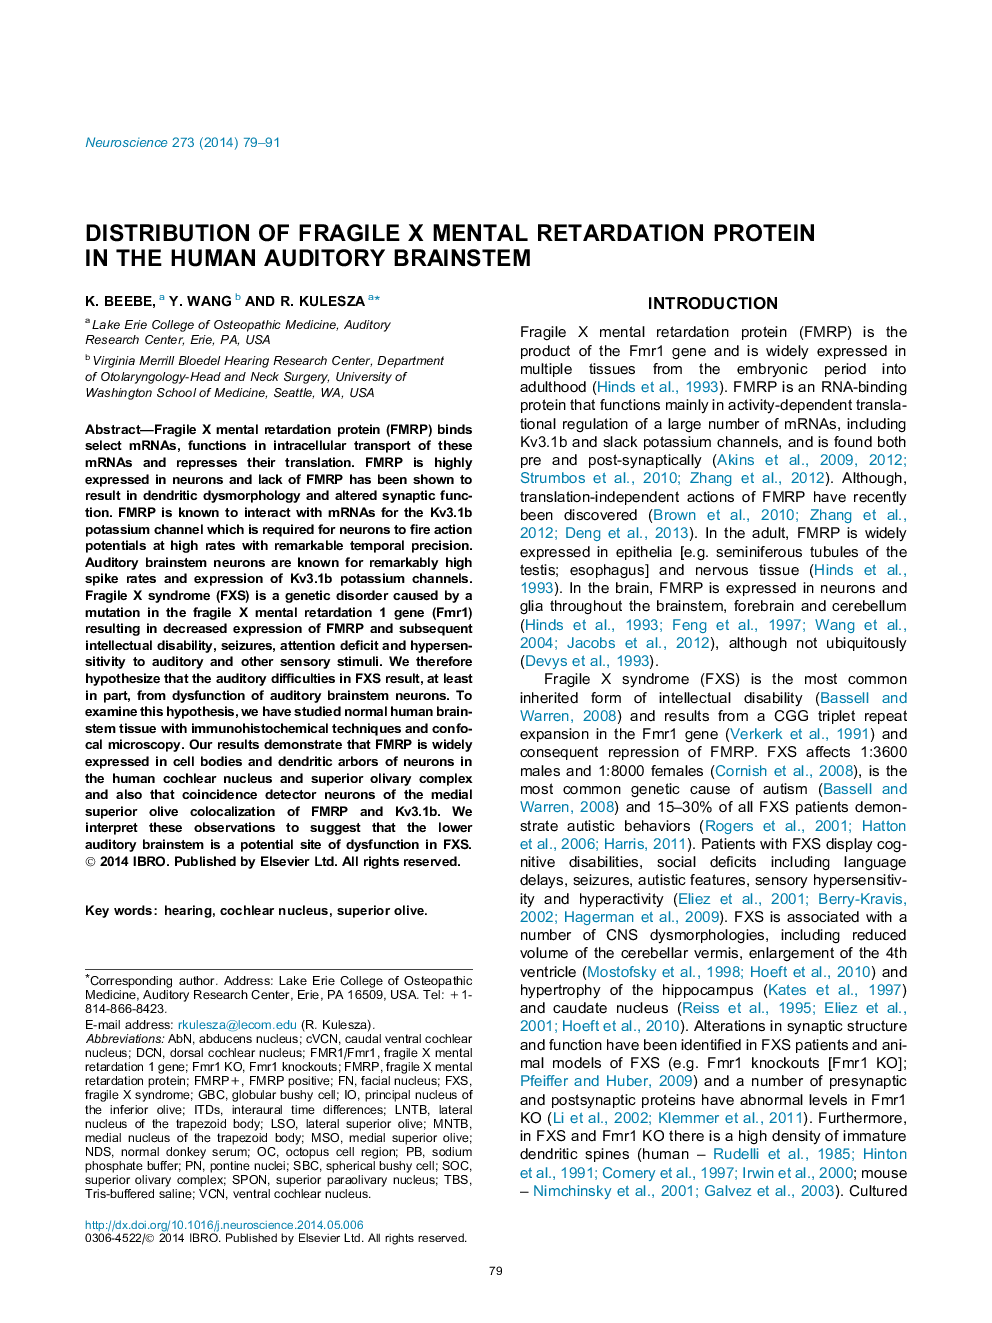 Distribution of fragile X mental retardation protein in the human auditory brainstem